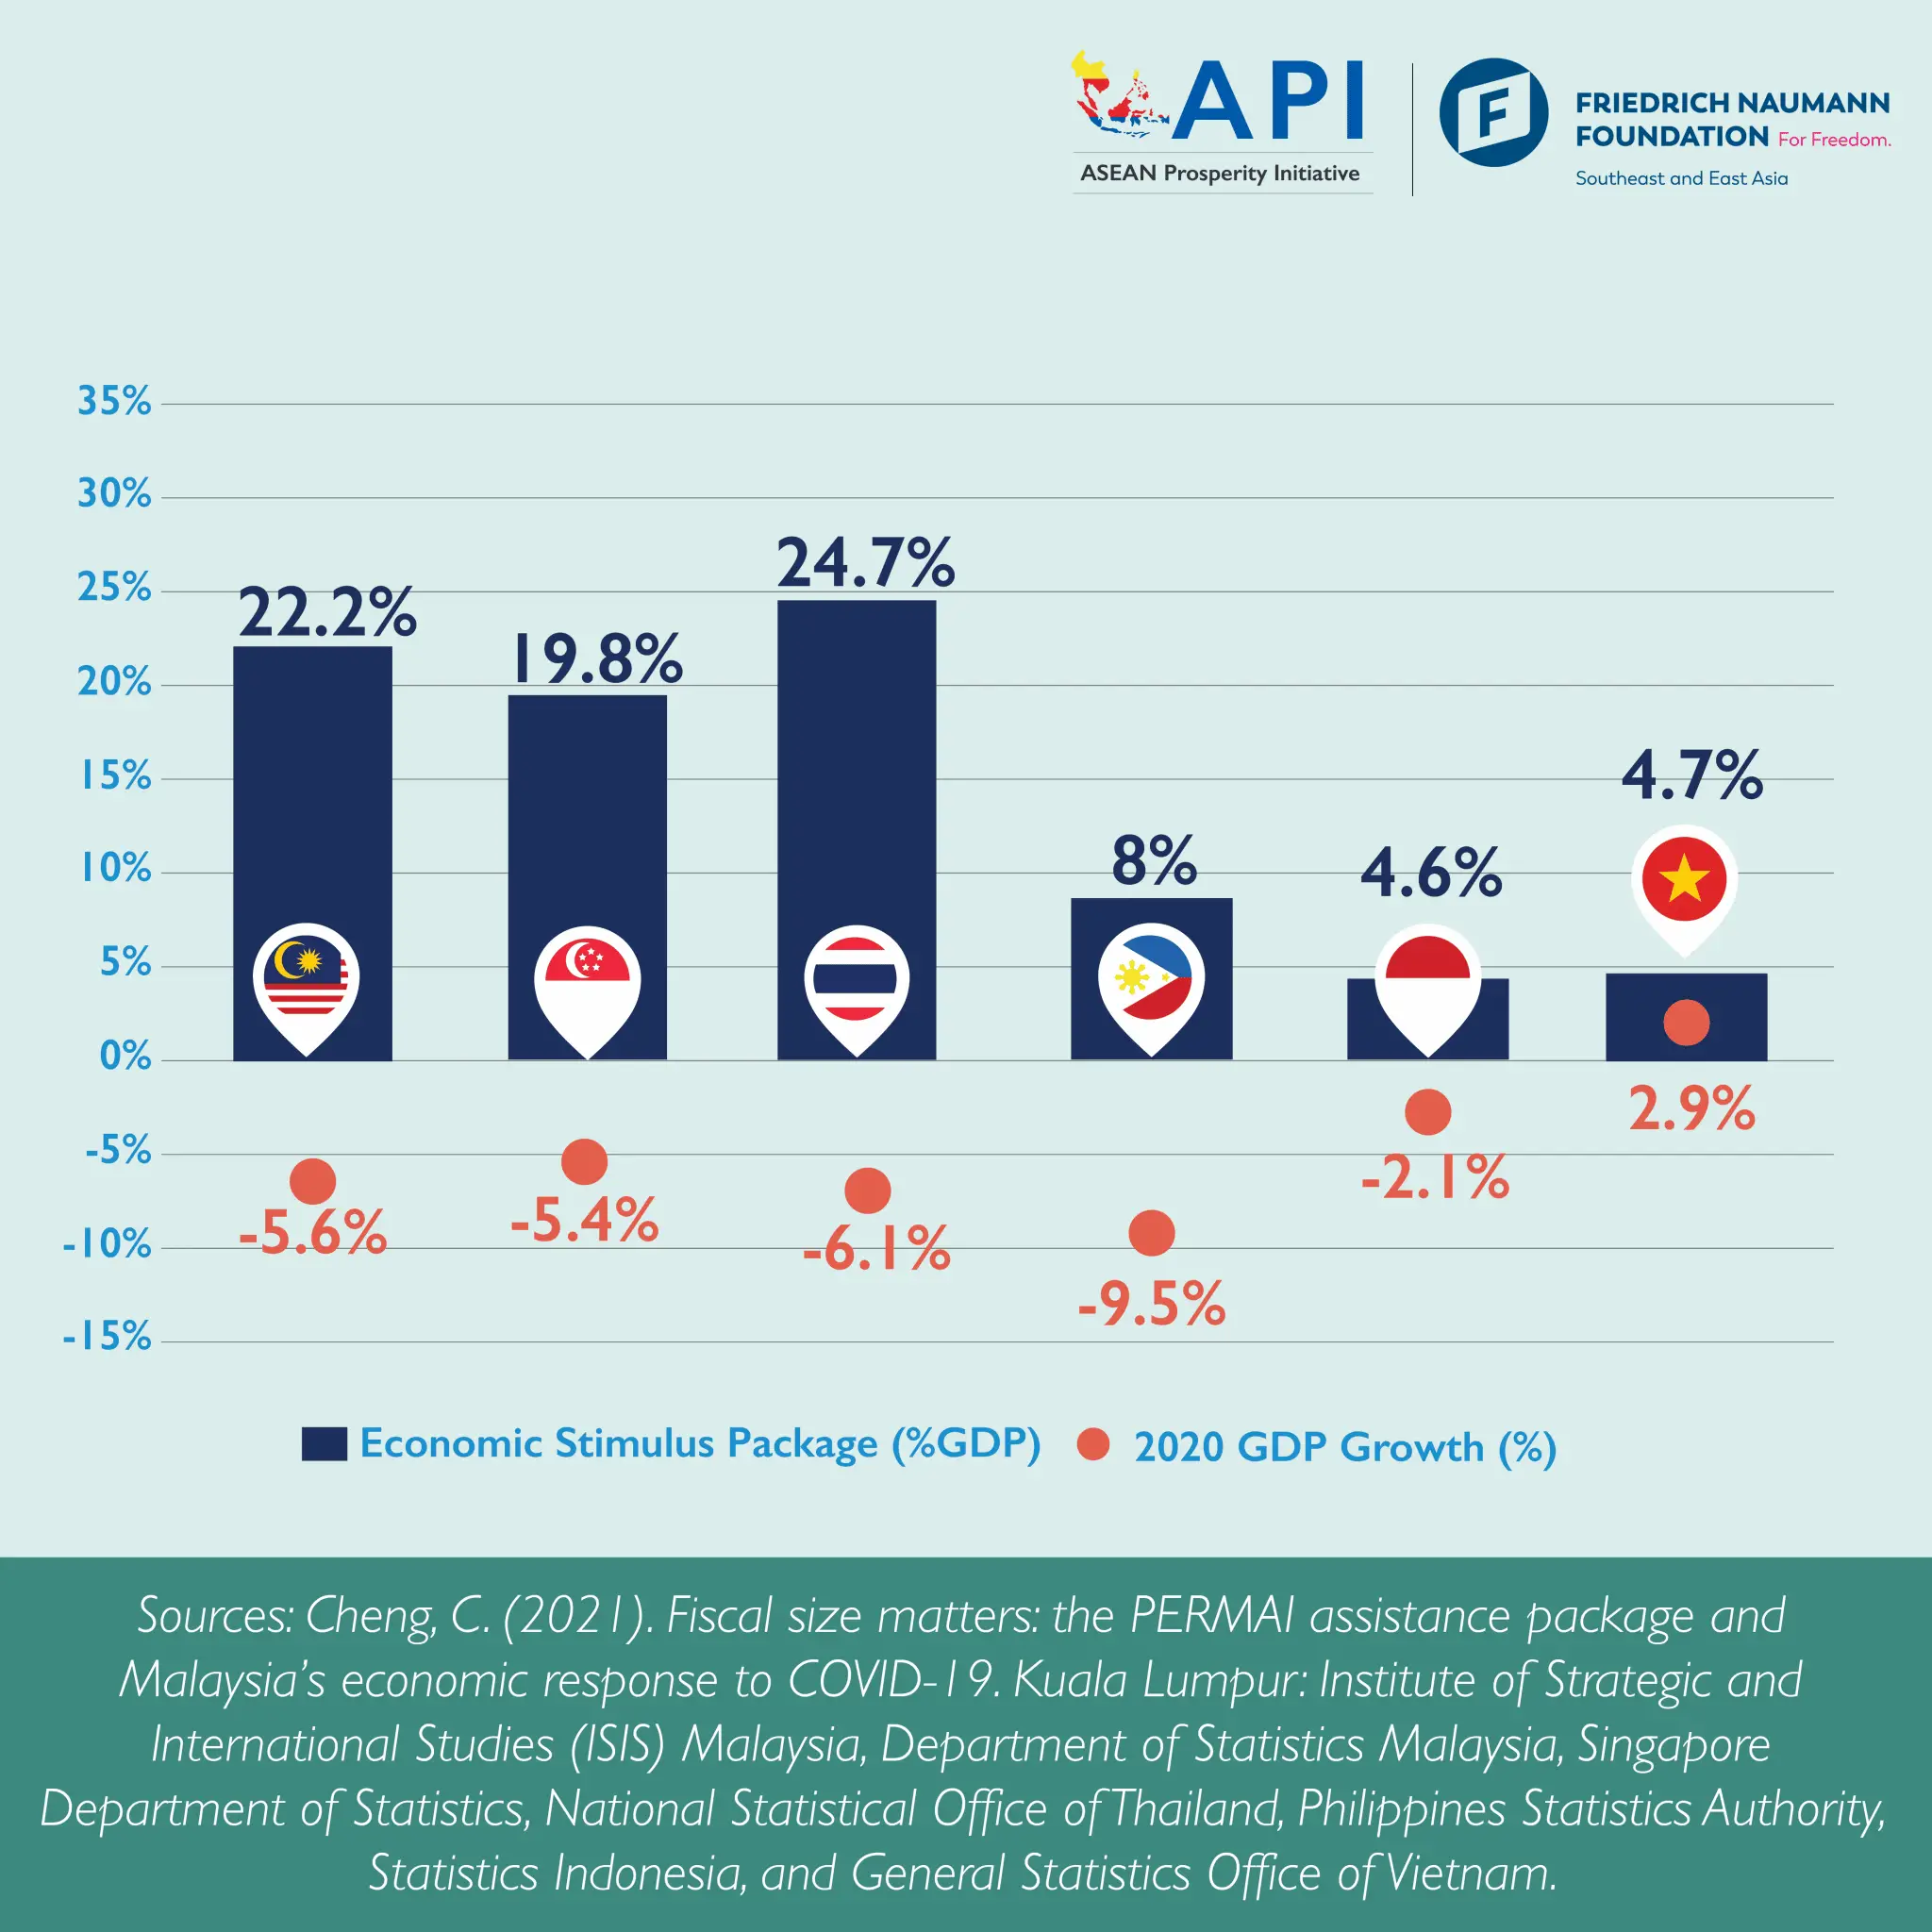 ASEAN Comparison on Economic Stimulus Package and 2020 GDP Growth